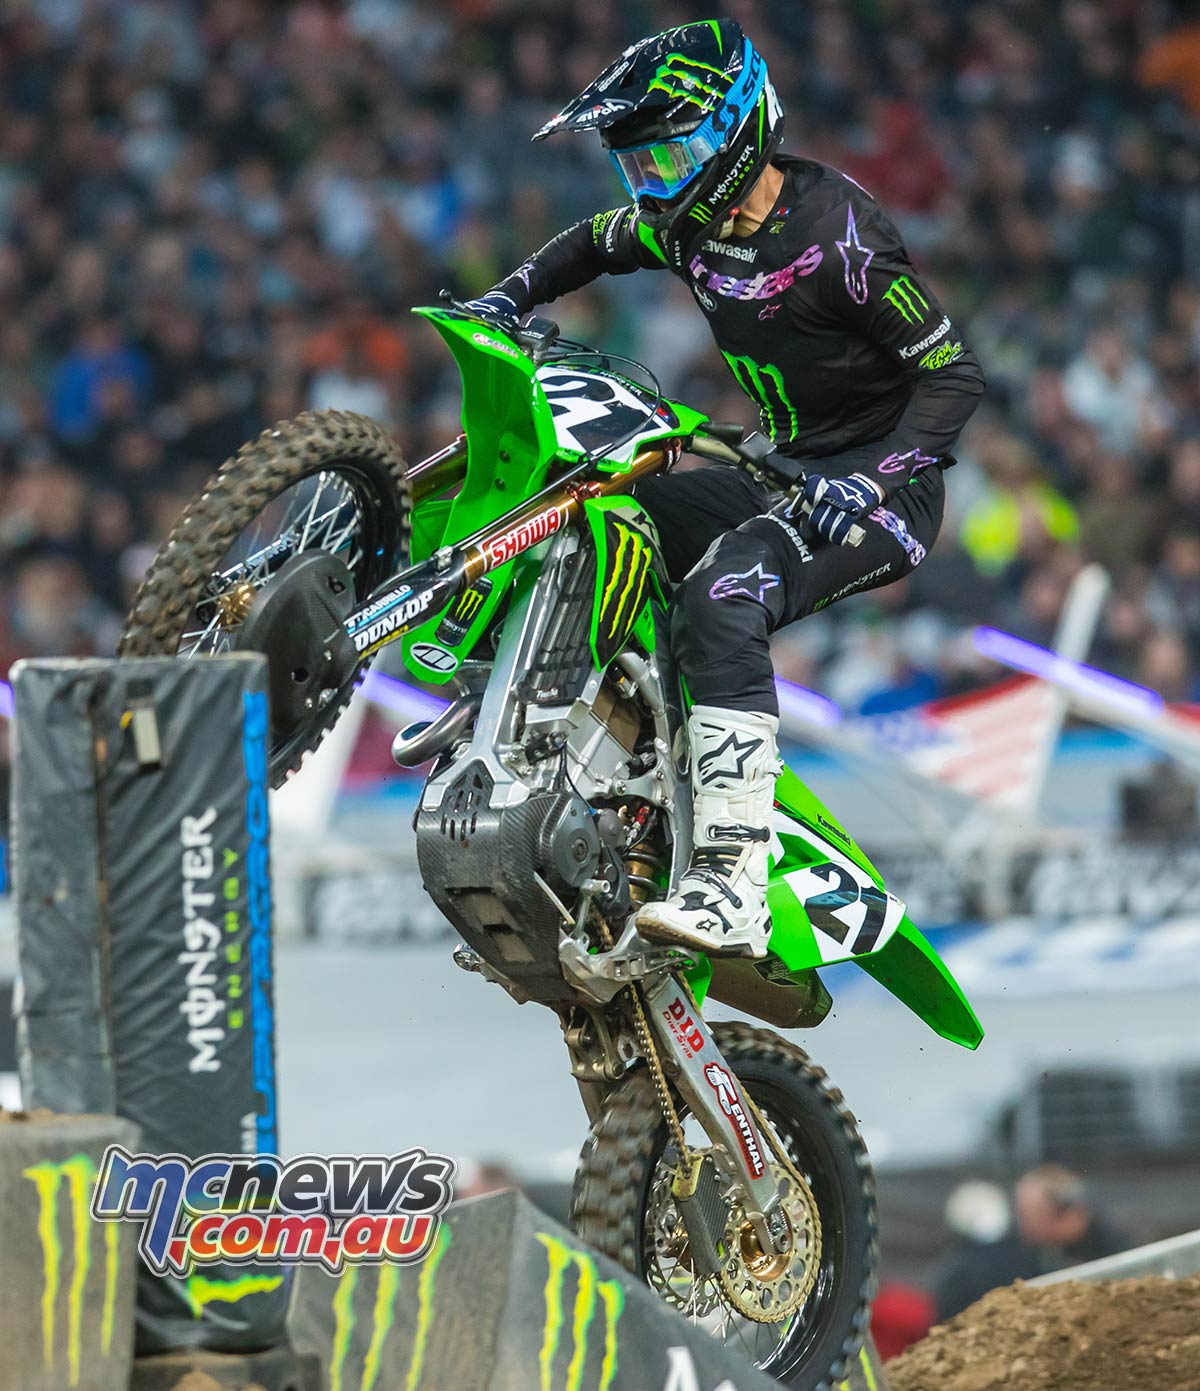 Monster image drop from New Jersey AMA Supercross MCNews